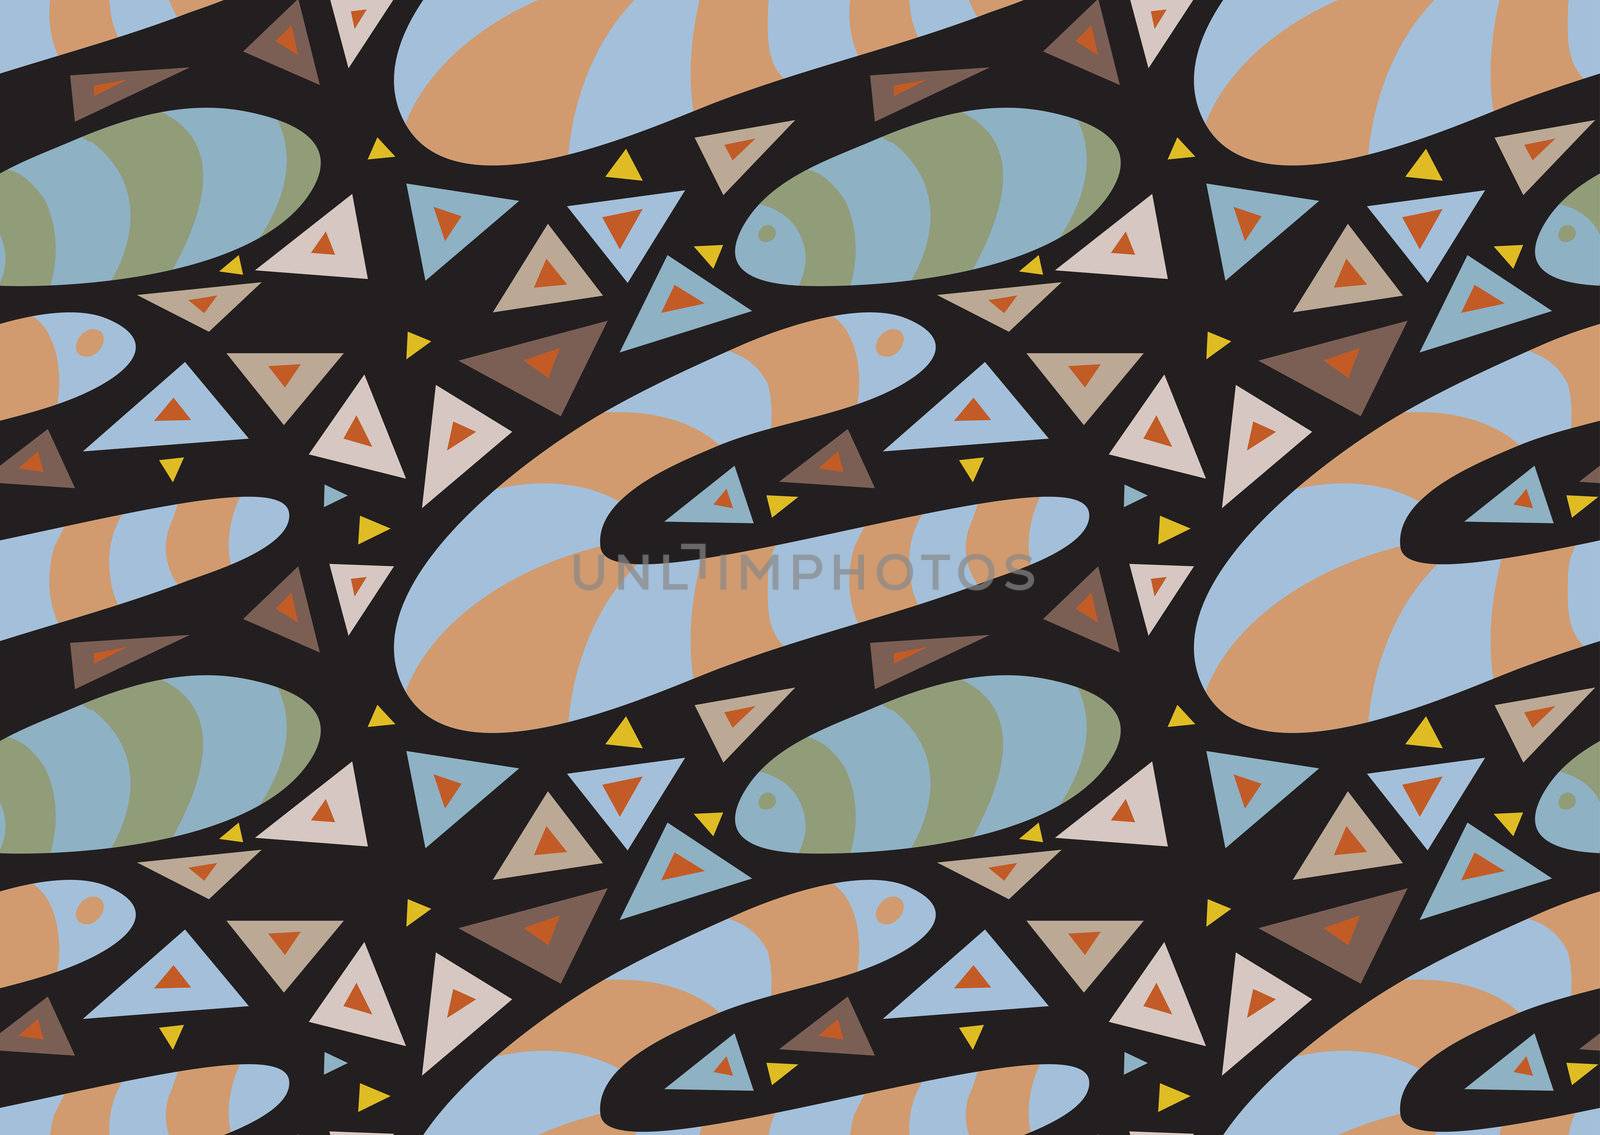 Abstract Underground Worm Pattern by TheBlackRhino